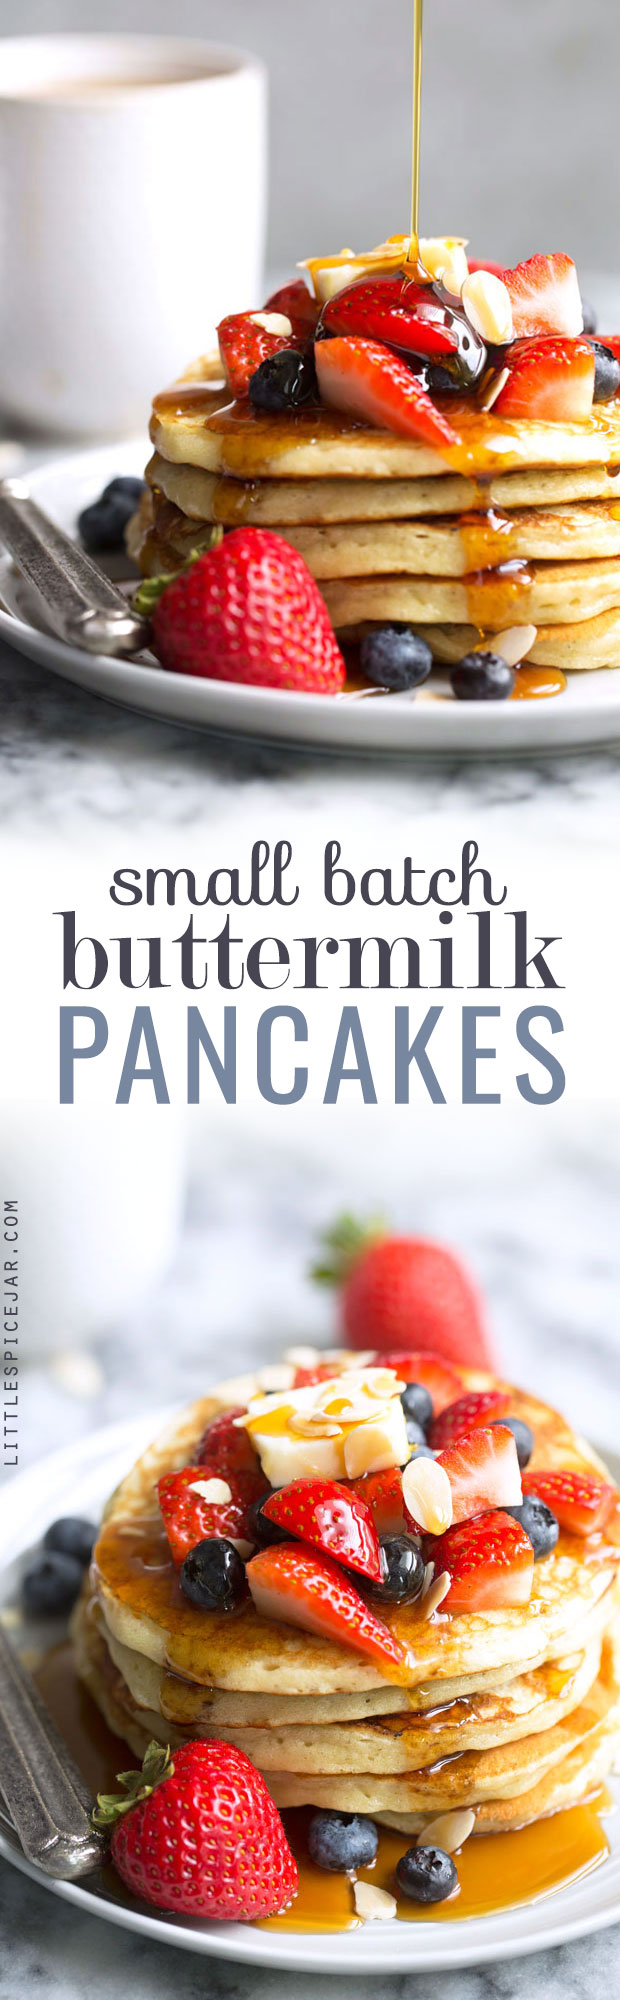 Small Batch Buttermilk Pancakes - Learn how to make a small batch of pancakes for just 2-3 people! These pancake are amazing! #smallbatchpancakes #buttermilkpancakes #pancakes | Littlespicejar.com